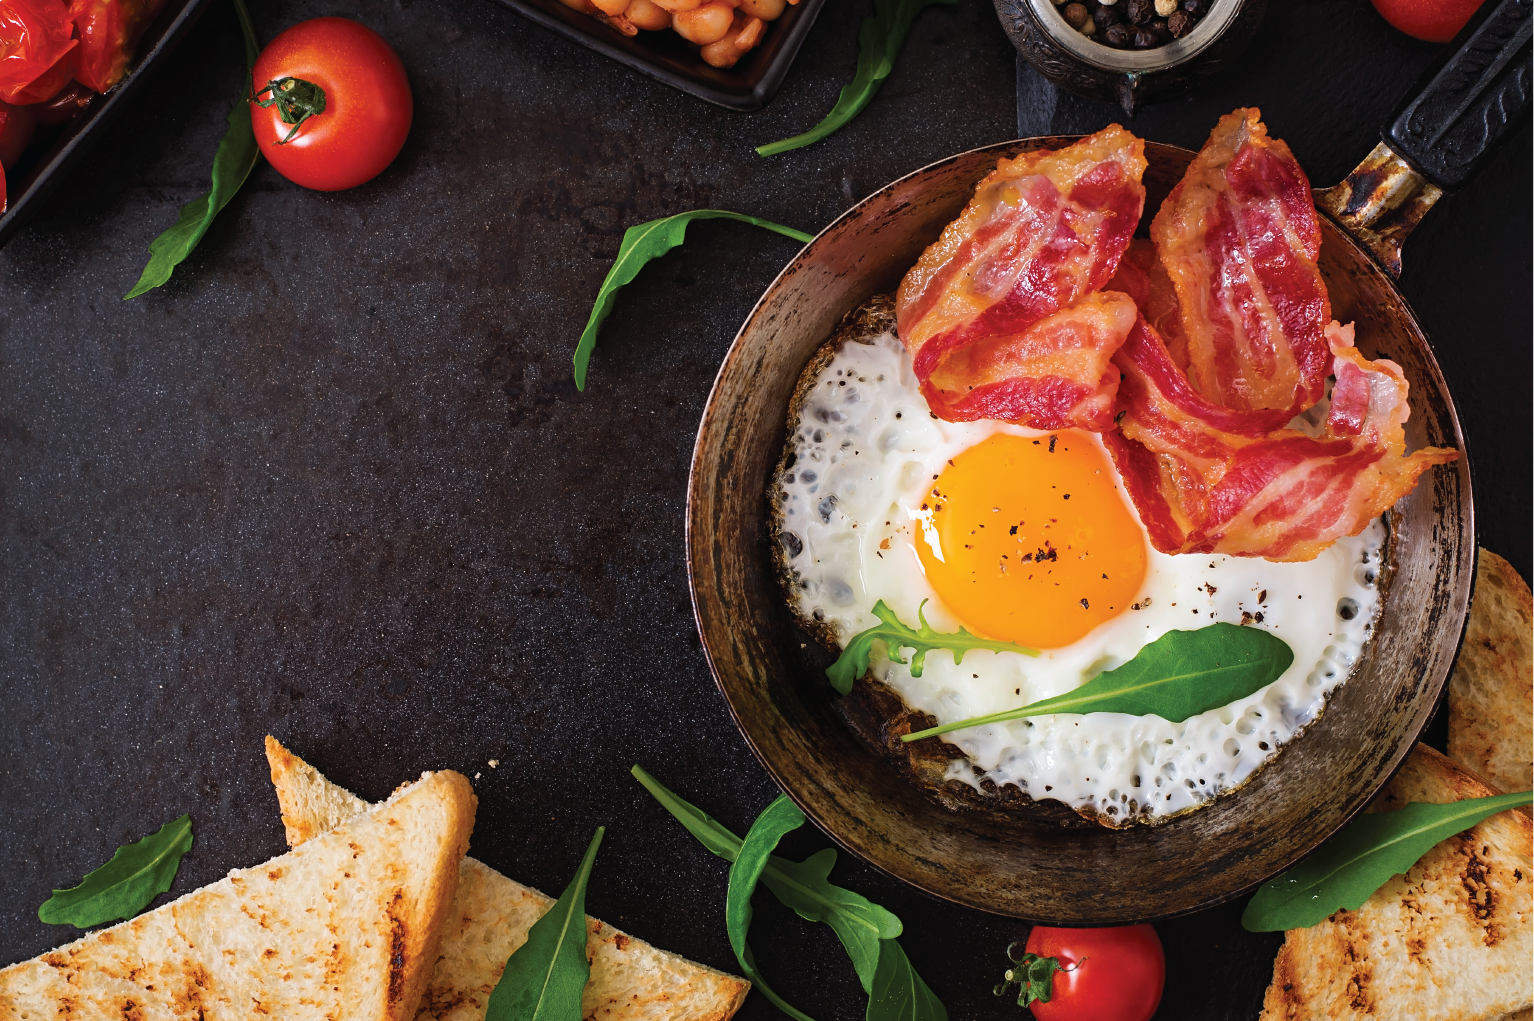 We’re always told that breakfast is the most important meal of the day, but do consumers actually feel that way? Turns out, yes - we’re big fans of food from the griddle.